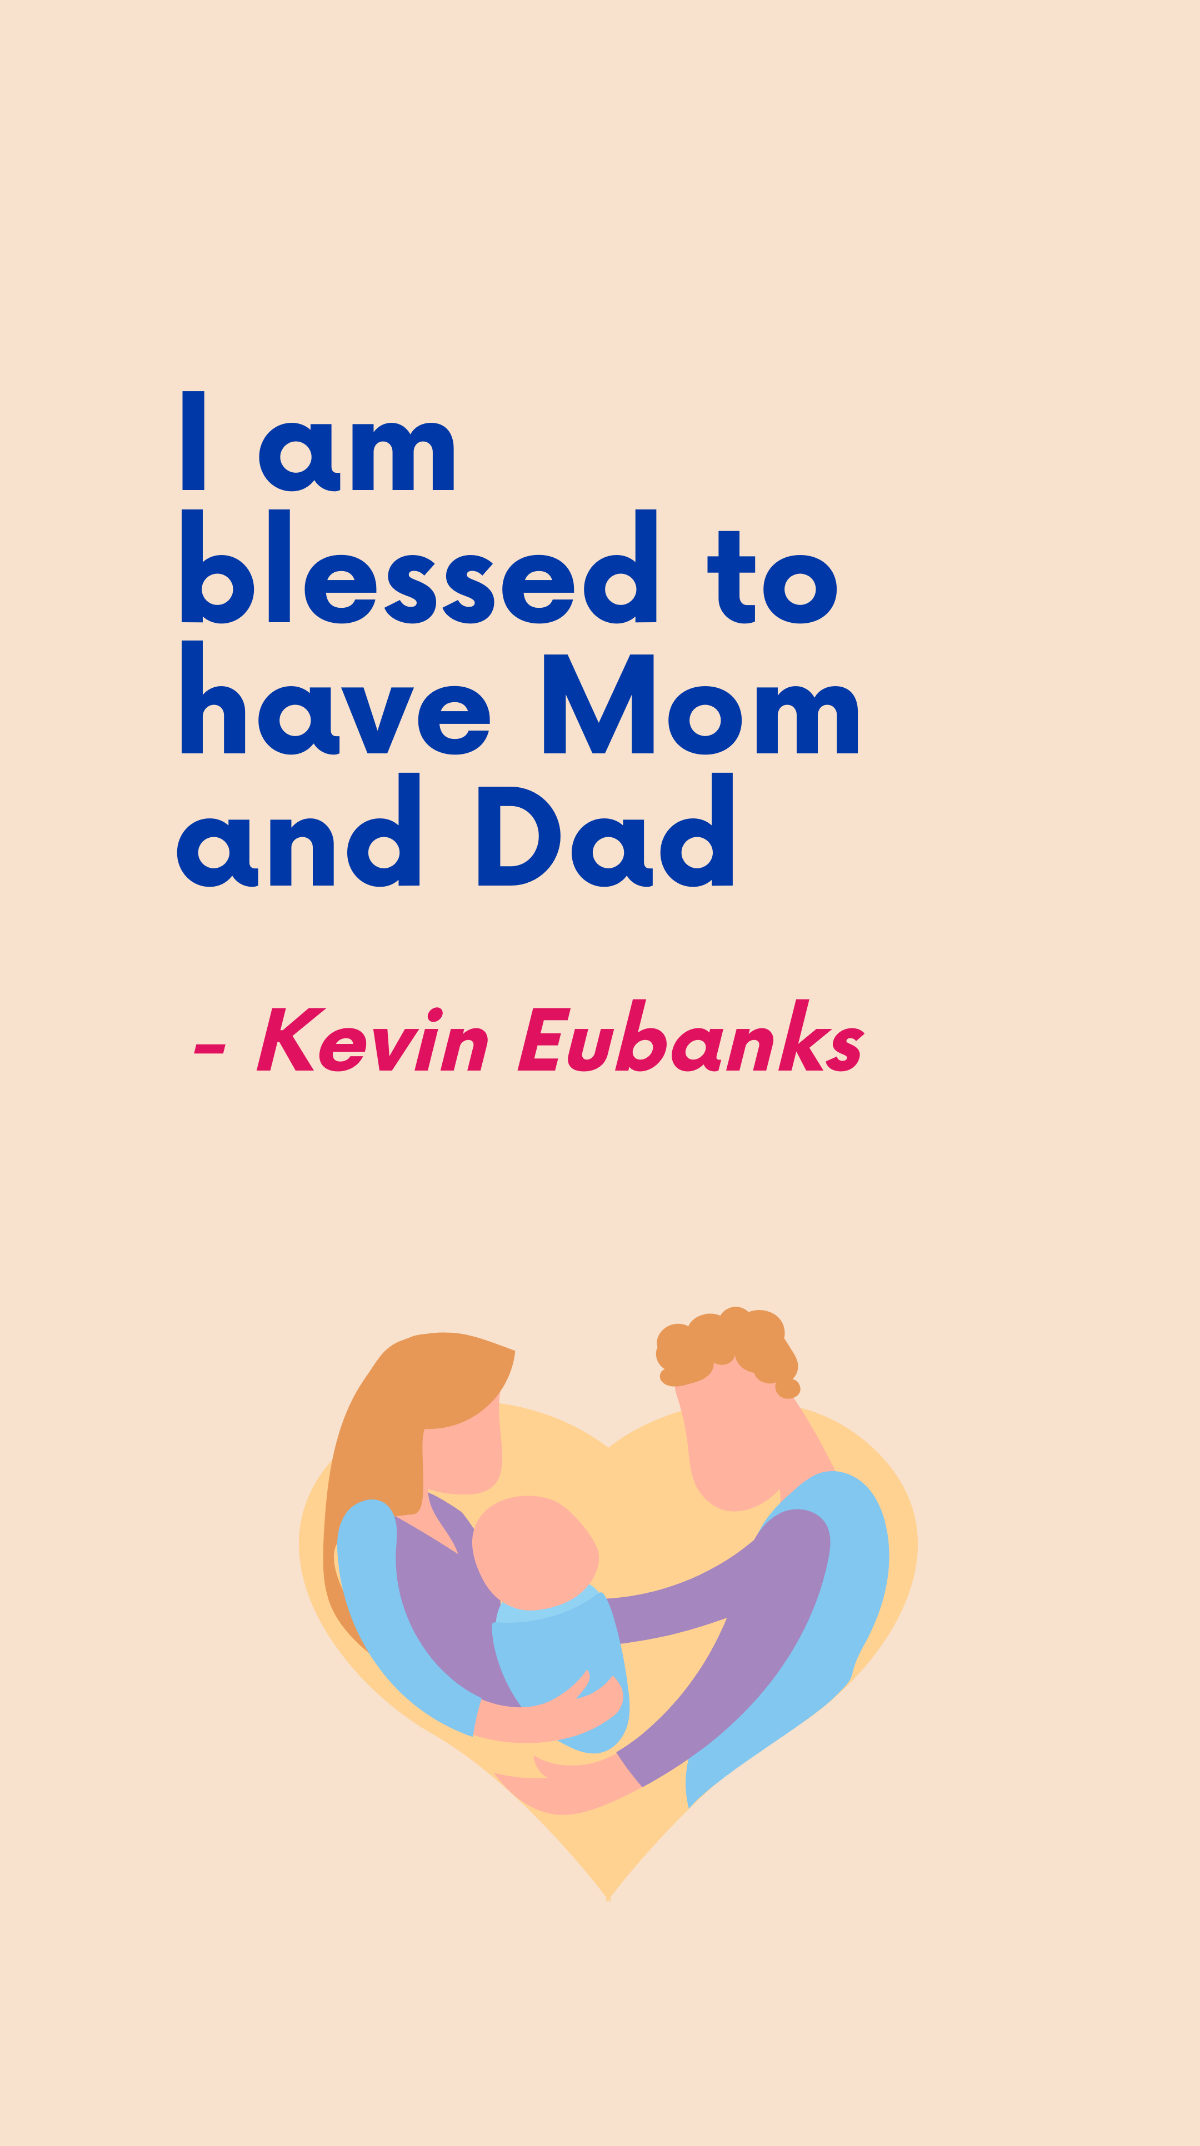 Kevin Eubanks - I am blessed to have Mom and Dad Template